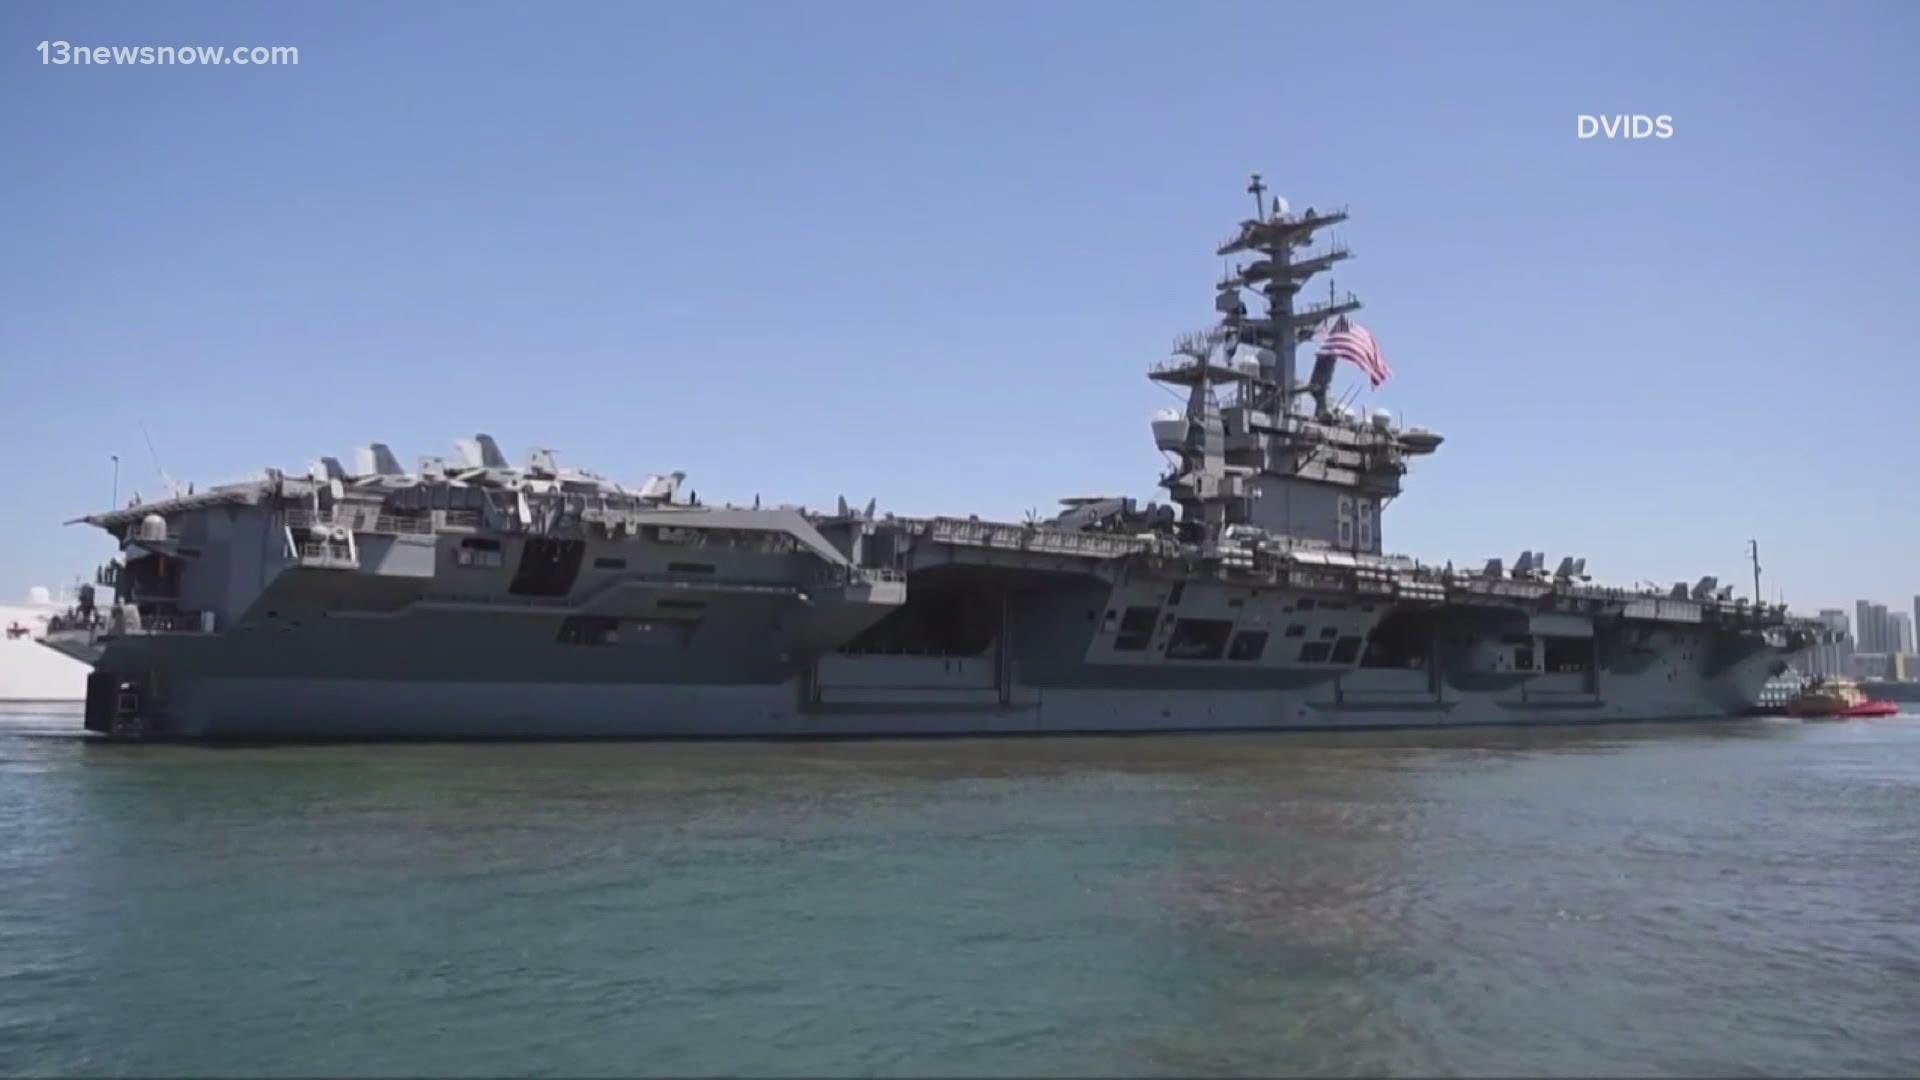 Acting Defense Secretary Christopher Miller announced last week he was sending the aircraft carrier home, a decision opposed by senior military officers.